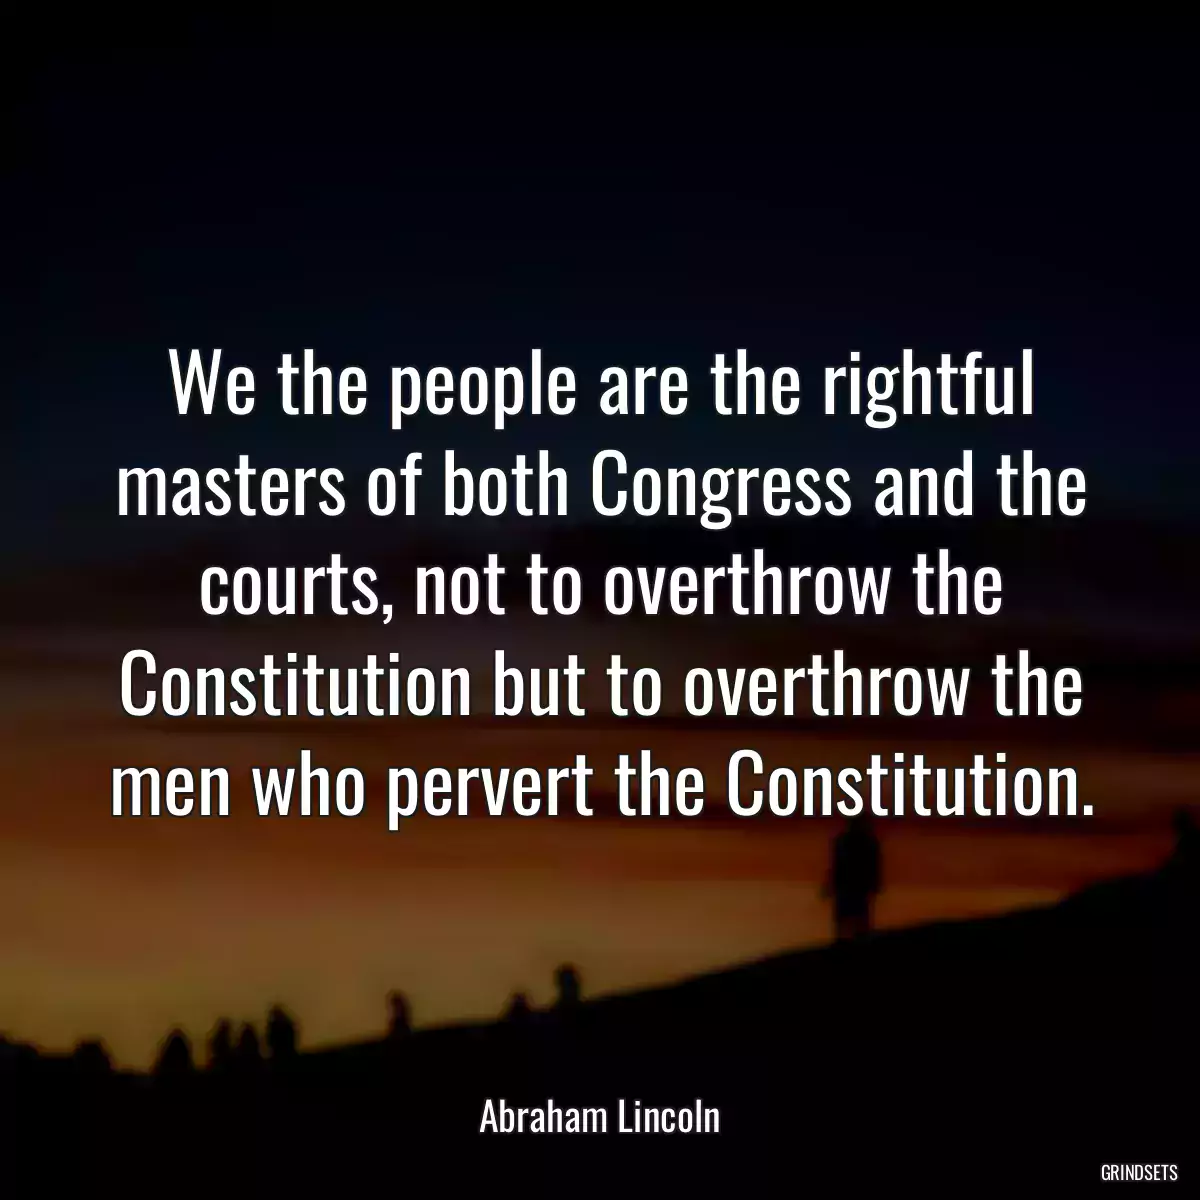 We the people are the rightful masters of both Congress and the courts, not to overthrow the Constitution but to overthrow the men who pervert the Constitution.